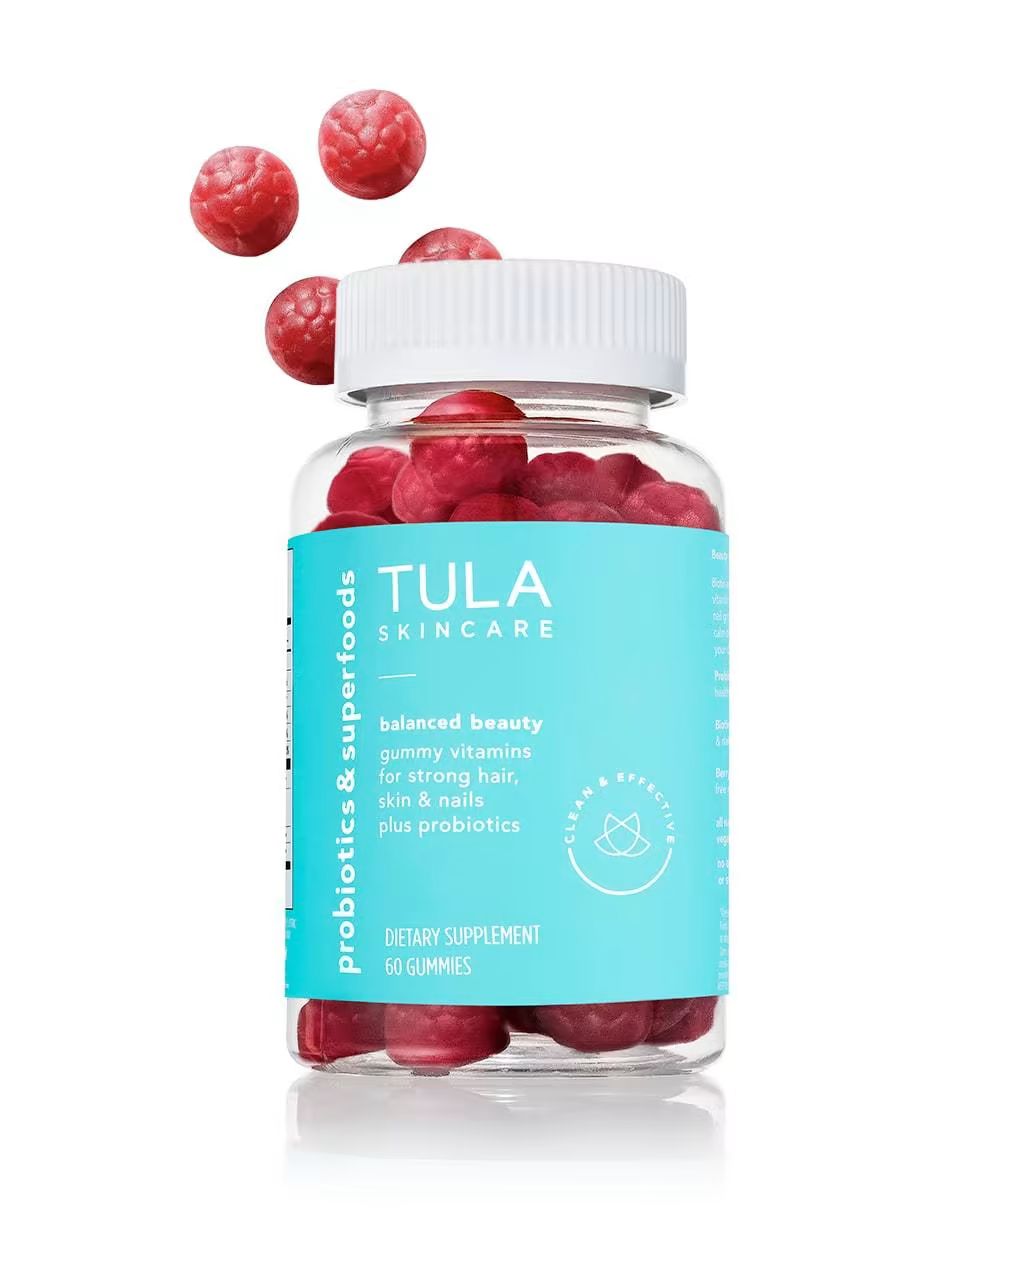 gummy vitamins for strong hair, skin & nails plus probiotics (60 count) | Tula Skincare